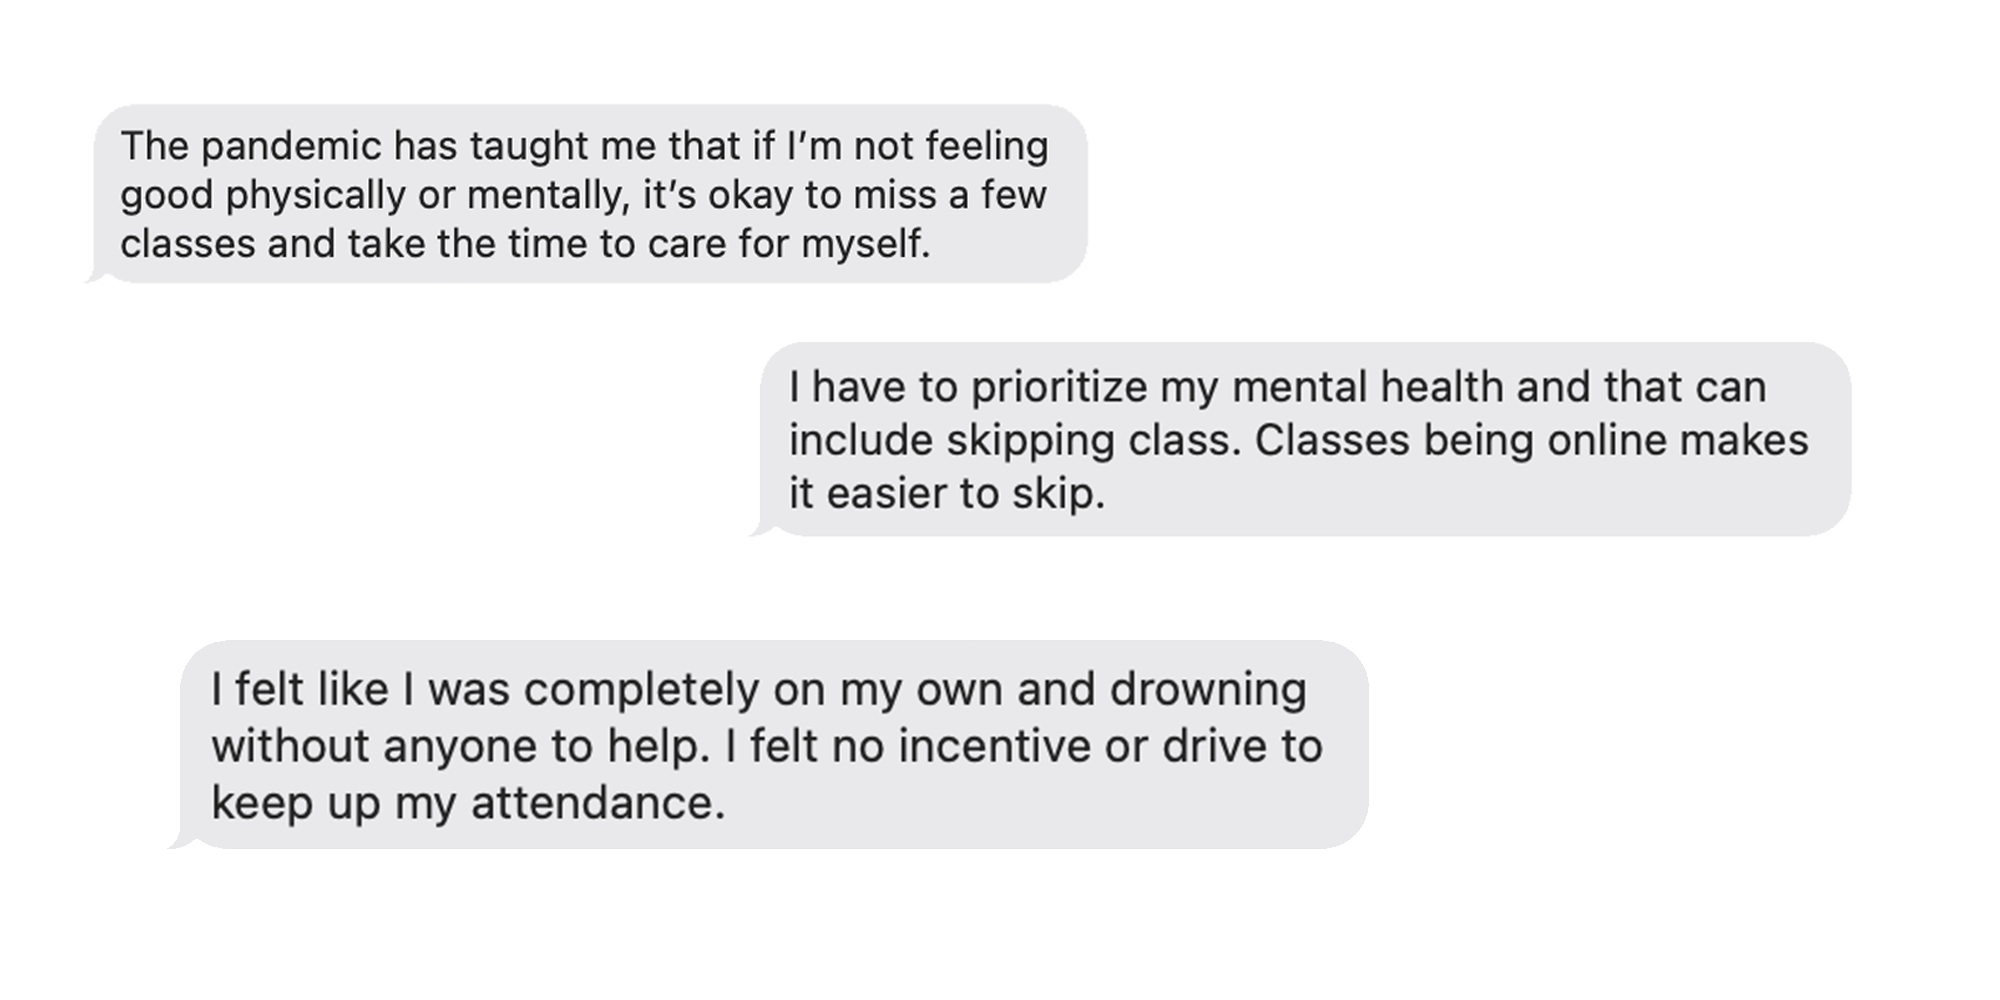 Three separate, staggered grey text message bubbles that read the following in order: “The pandemic has taught me that if I’m not feeling good physically or mentally it’s okay to miss a few classes and take the time to care for myself.” “I have to prioritize my mental health and that can include skipping class. Classes being online makes it easier to skip” “I felt like I was completely on my own and drowning without anyone to help. I felt no incentive or drive to keep up my attendance”